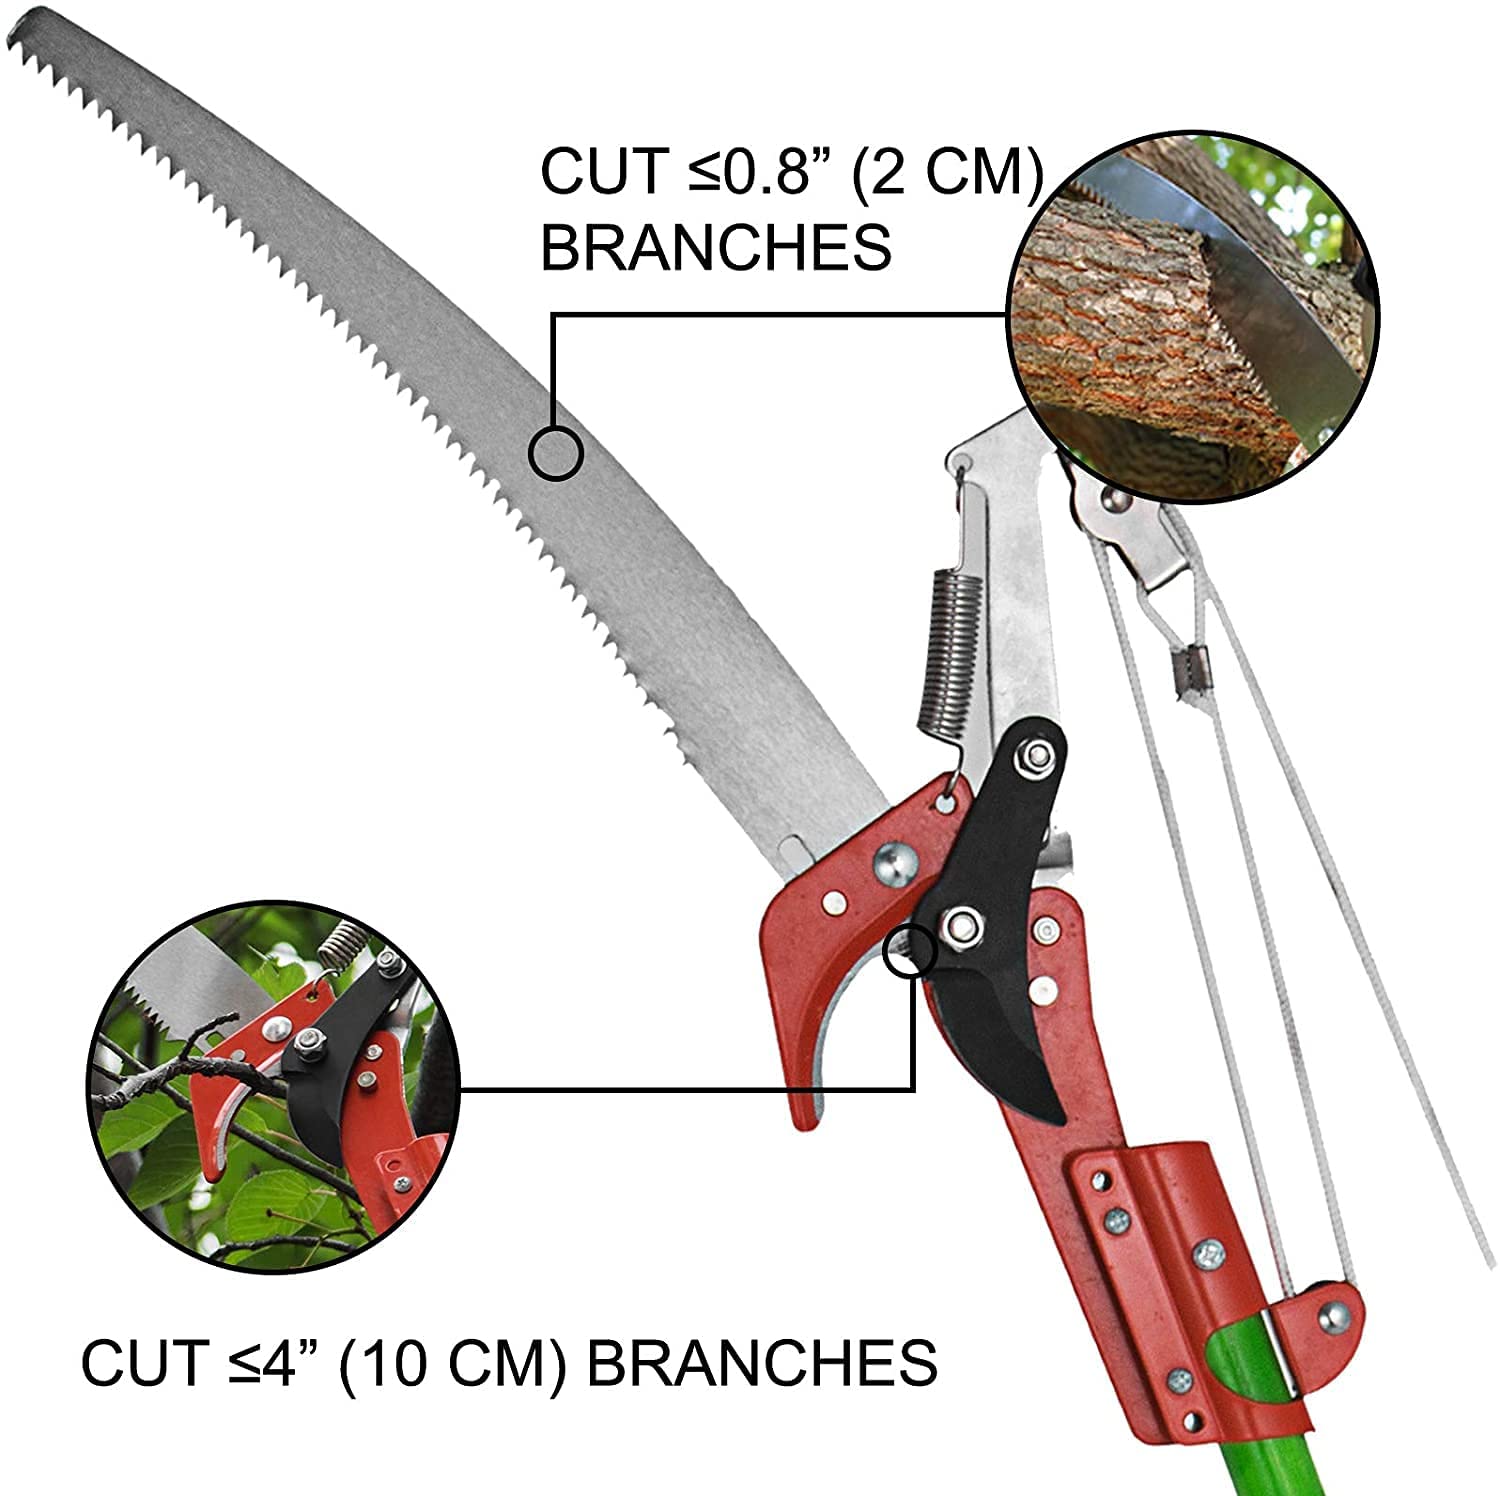 Techtongda New 26 Feet Tree Saw Pruner Tree Branch Trimmer Cutter Loppers Hand Pole Saws Free Shipping - image 4 of 15